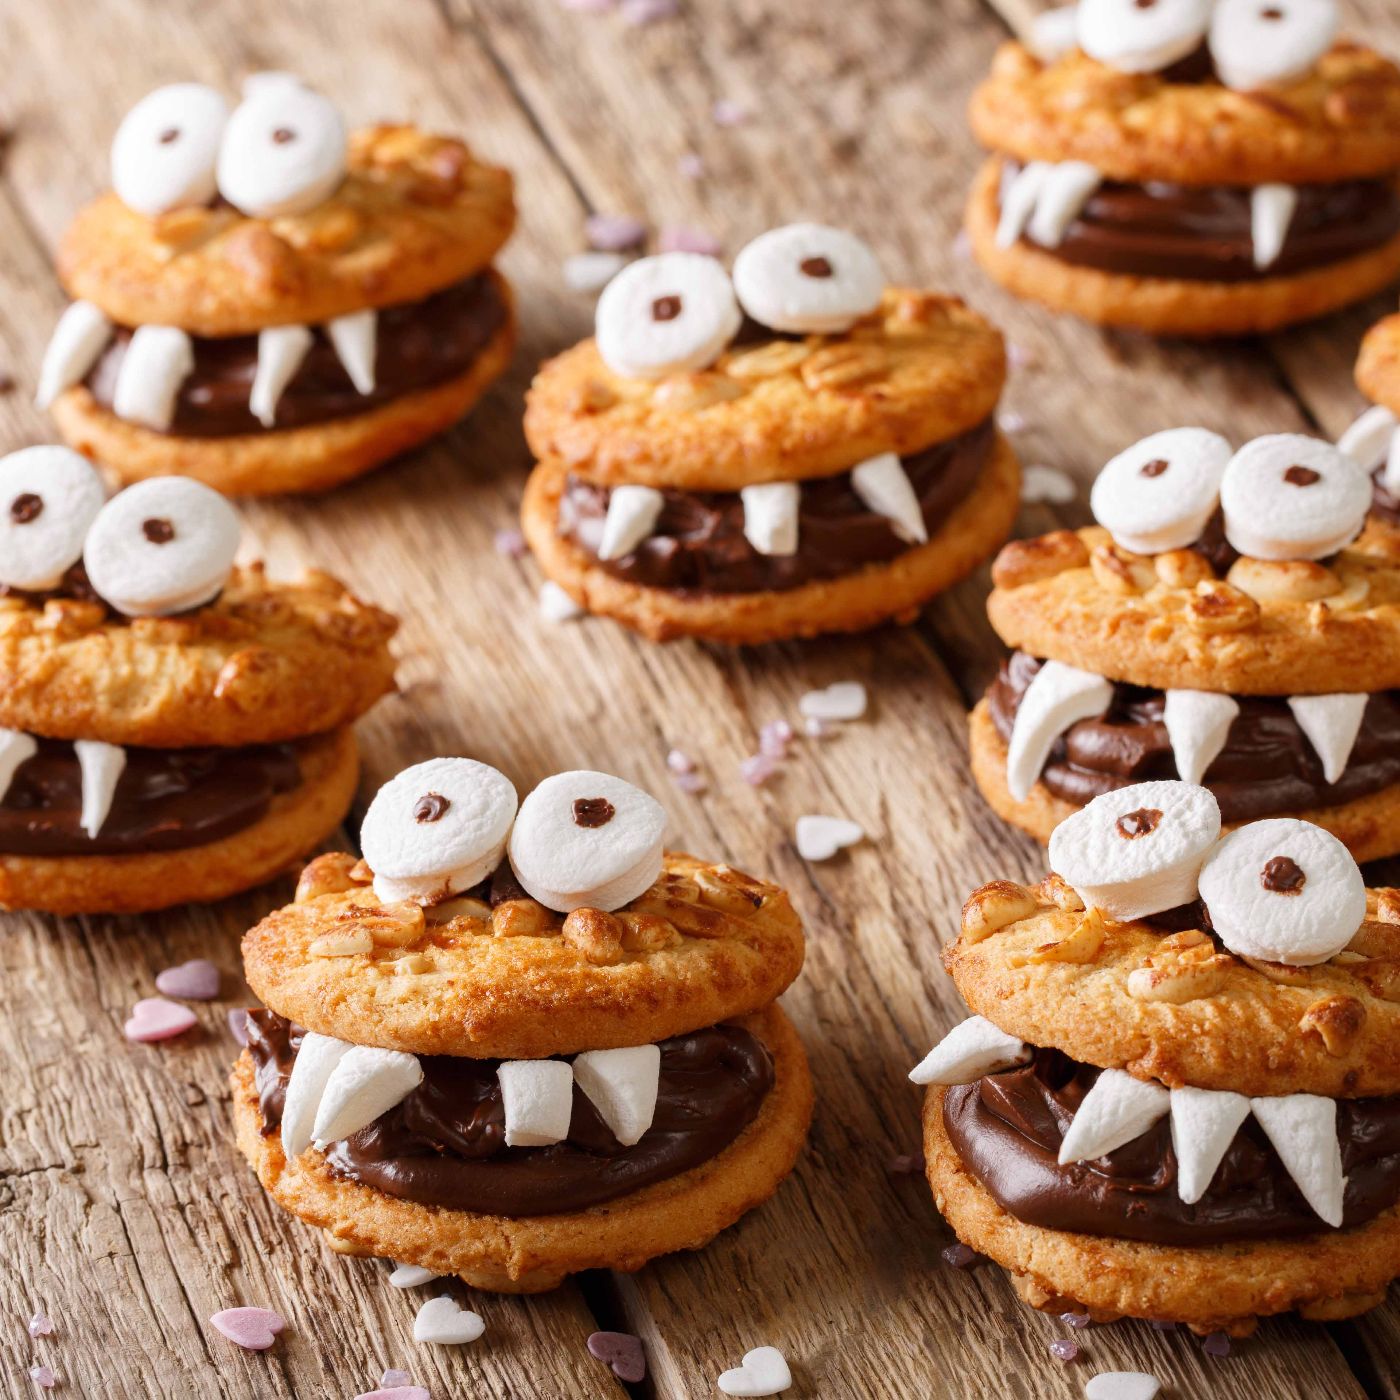 Toothed-monsters-of-cookies-close-up-for-Halloween.-horizontal-1036805500_5760x3840_square.jpg